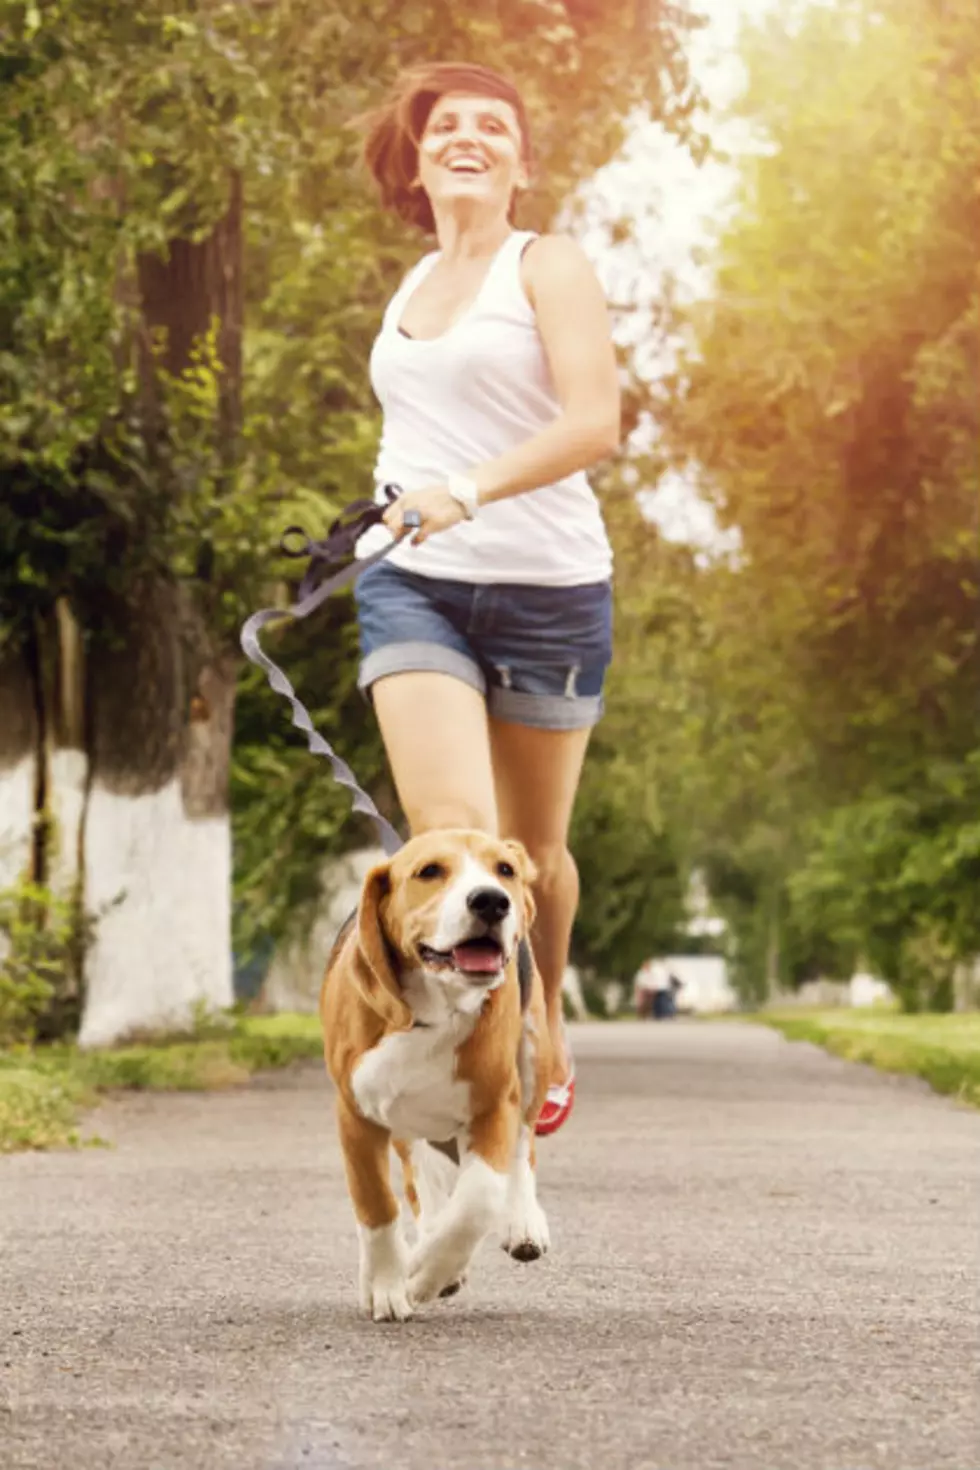 Getting a Dog Can Help You Lose Weight